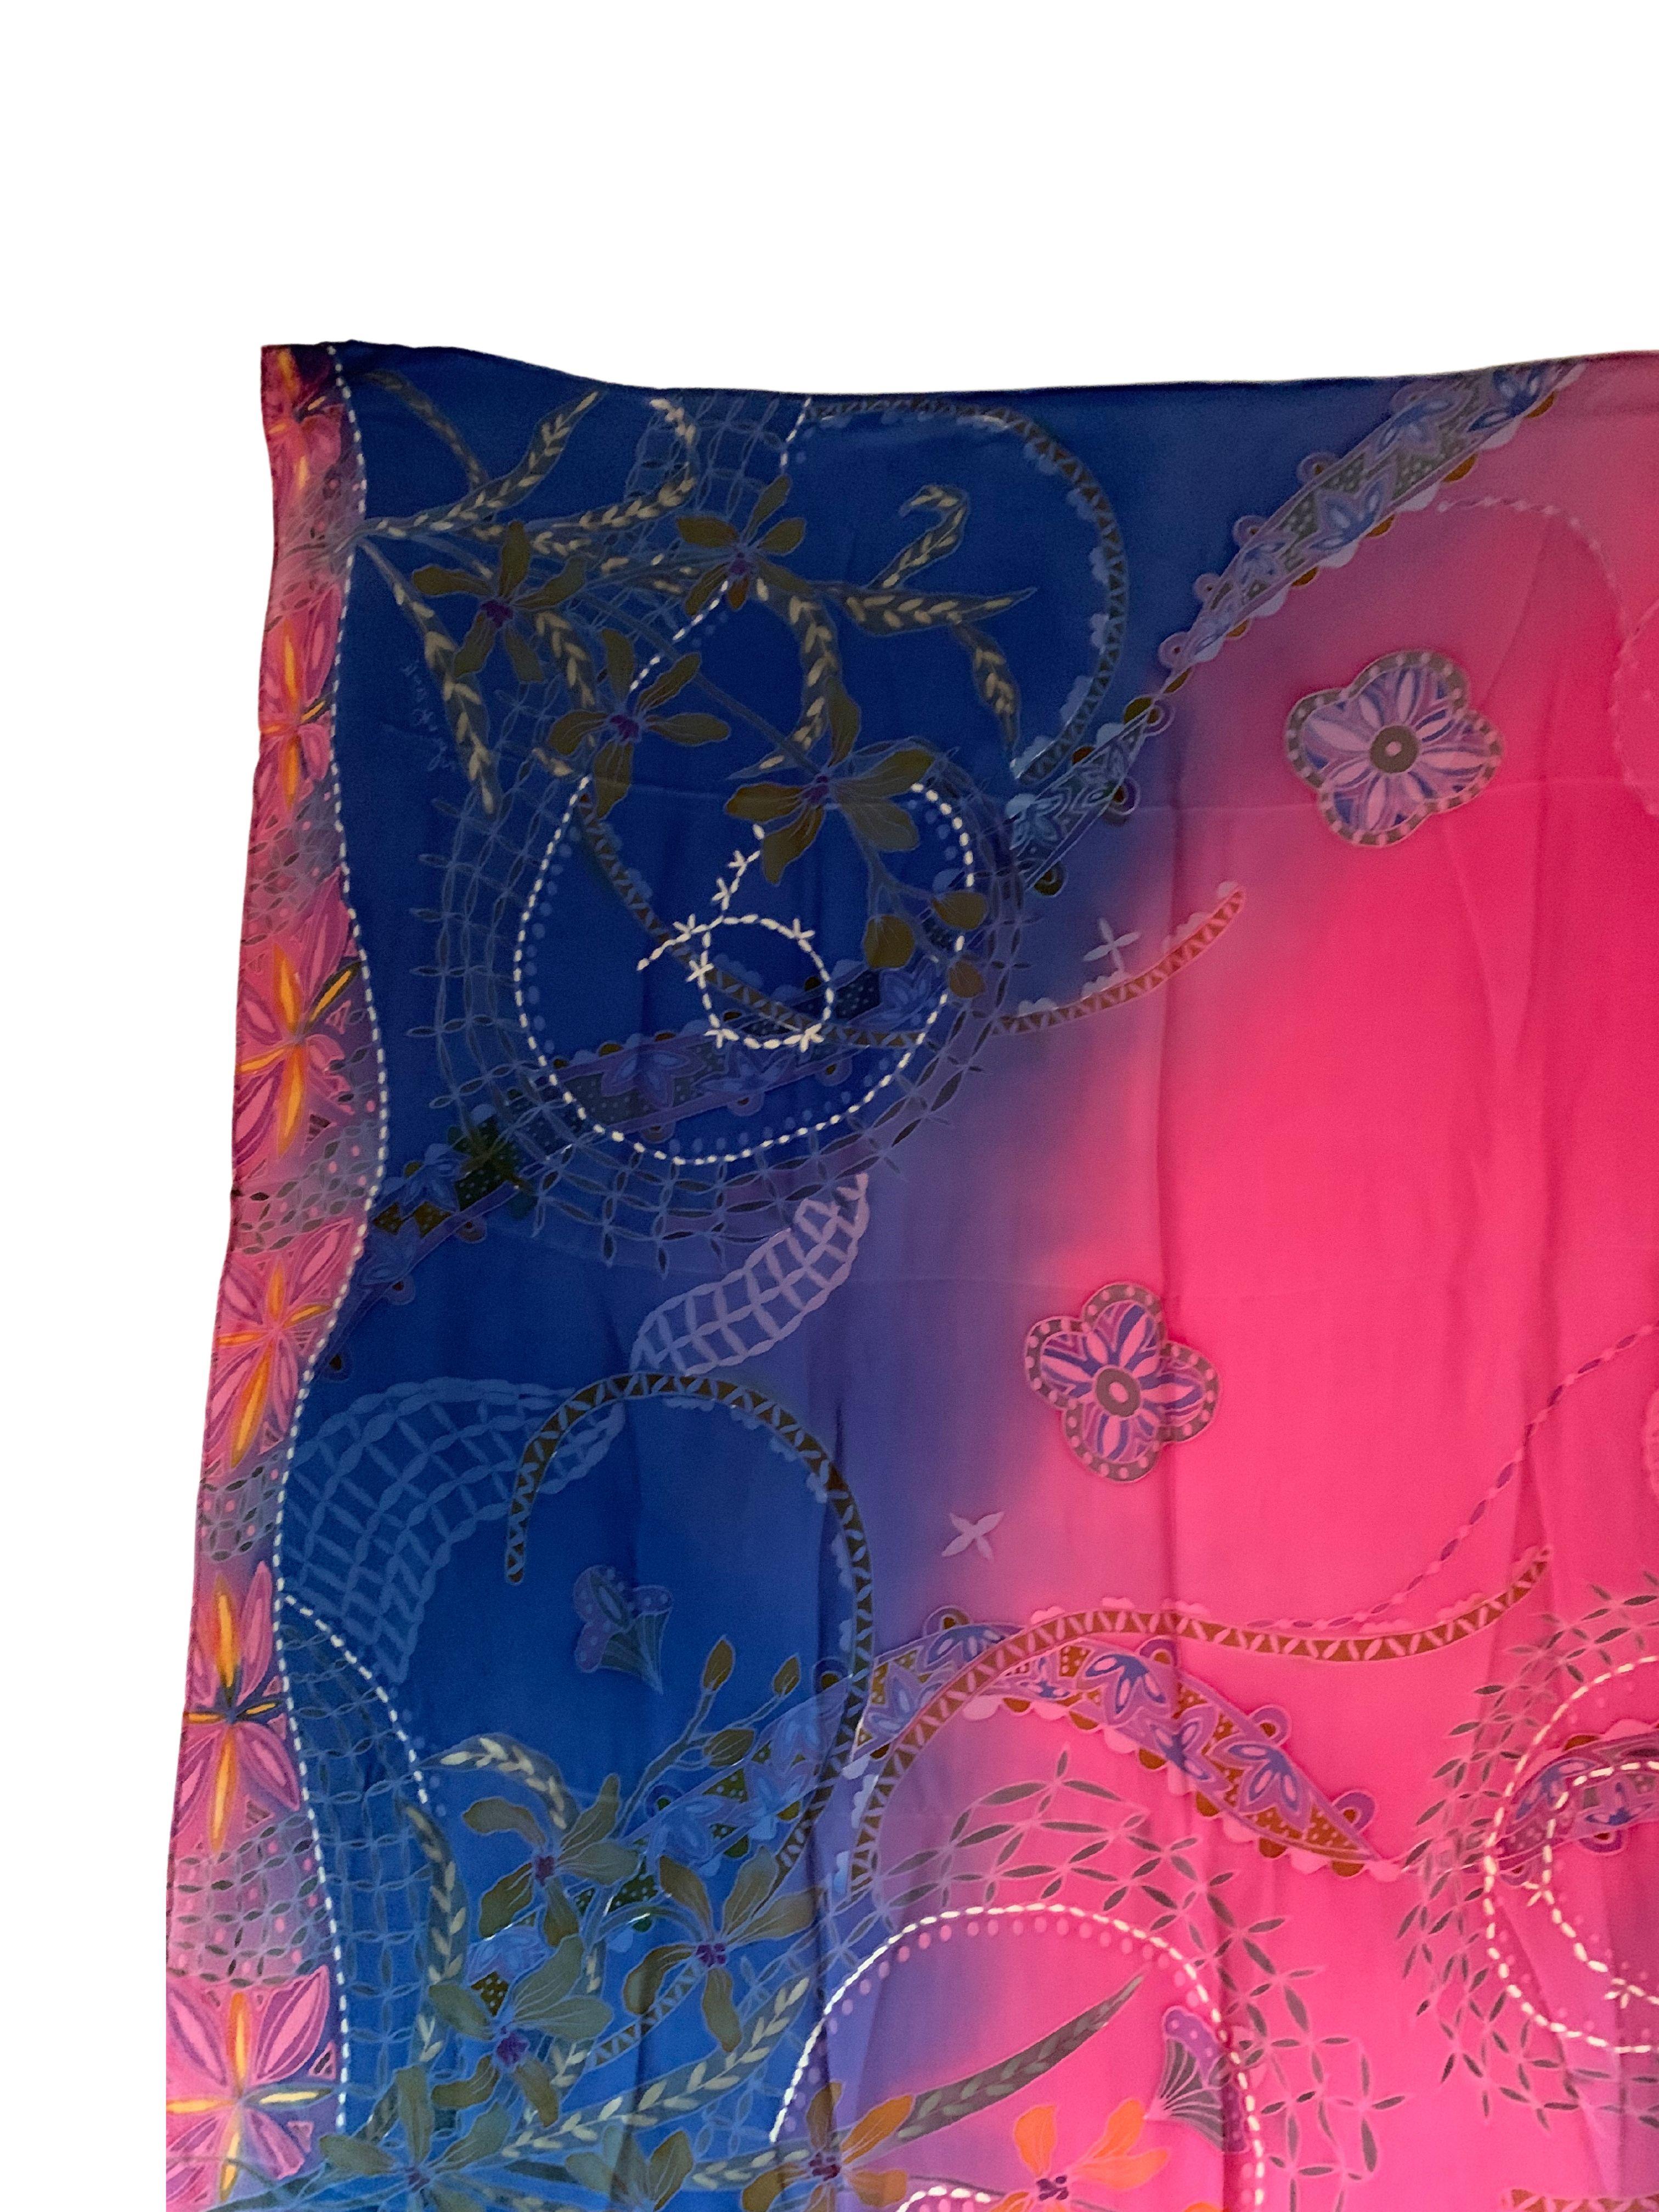 A wonderful hand-crafted Silk Textile from Malaysia with Stunning Detailing and shades. A wonderful decorative object to bring warmth and color to any space. This textile was hand-crafted by local weavers.